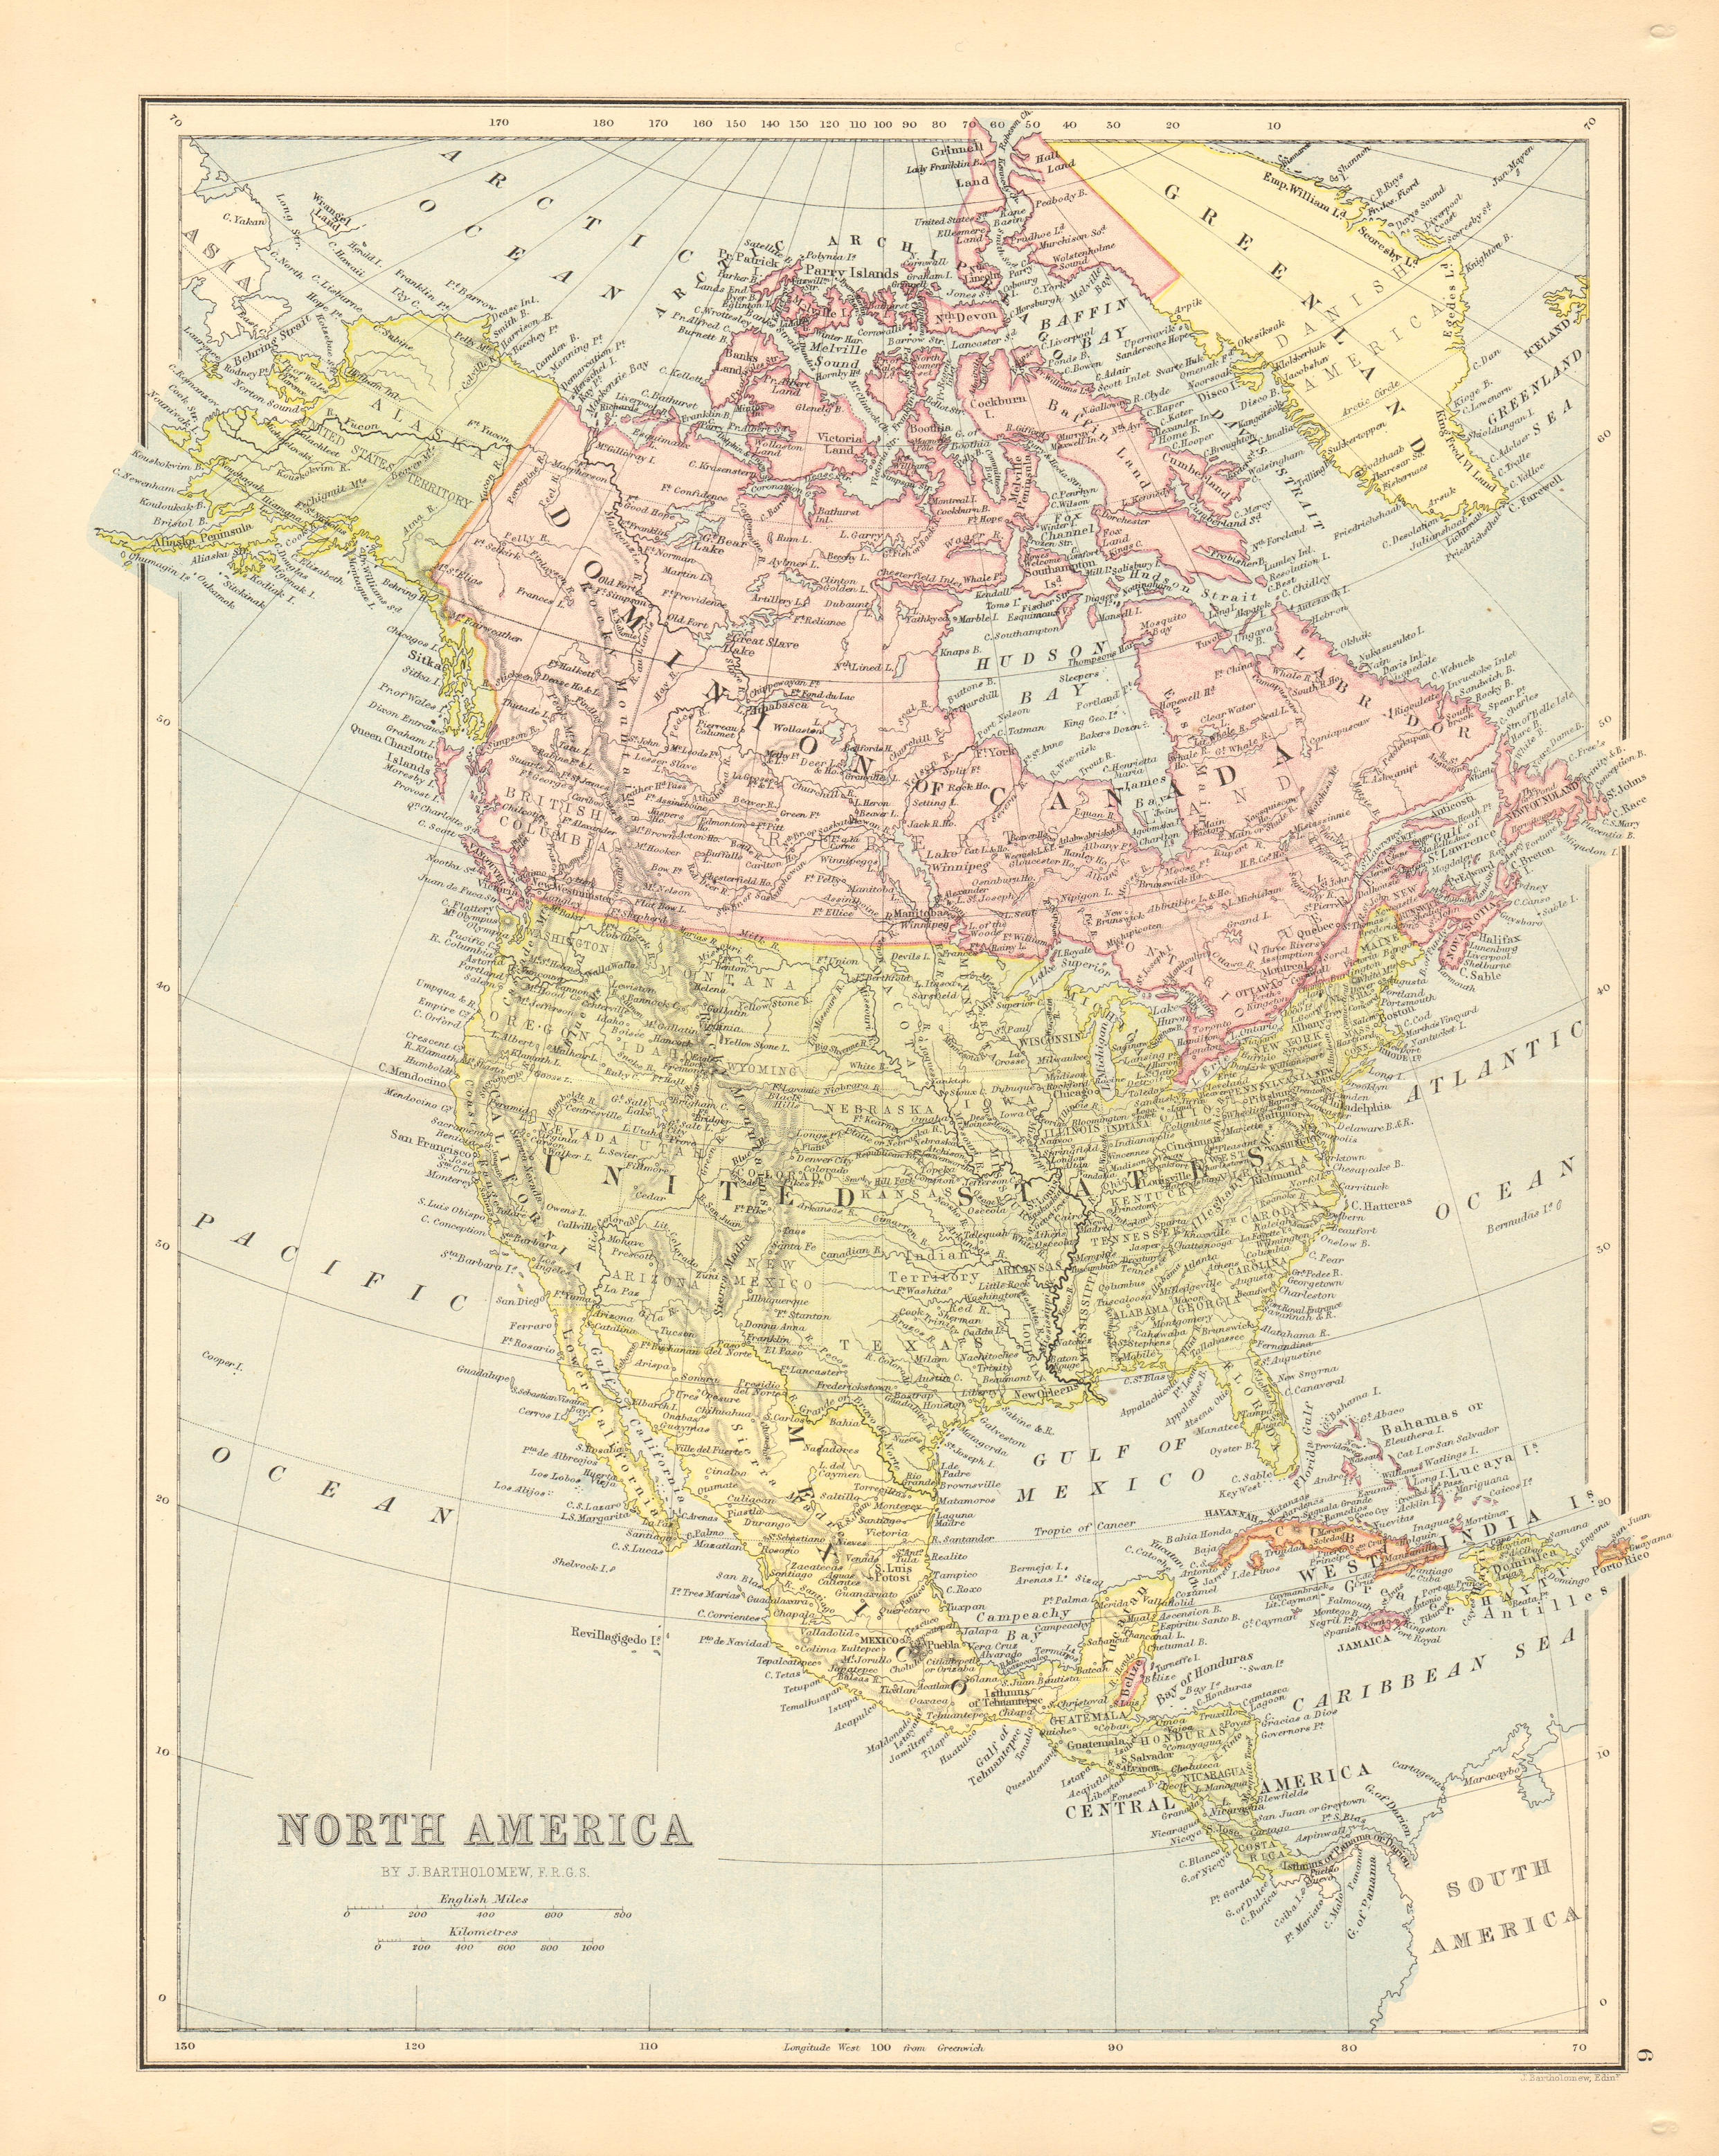 Associate Product NORTH AMERICA. Shows part of Greenland as Canadian. BARTHOLOMEW 1876 old map